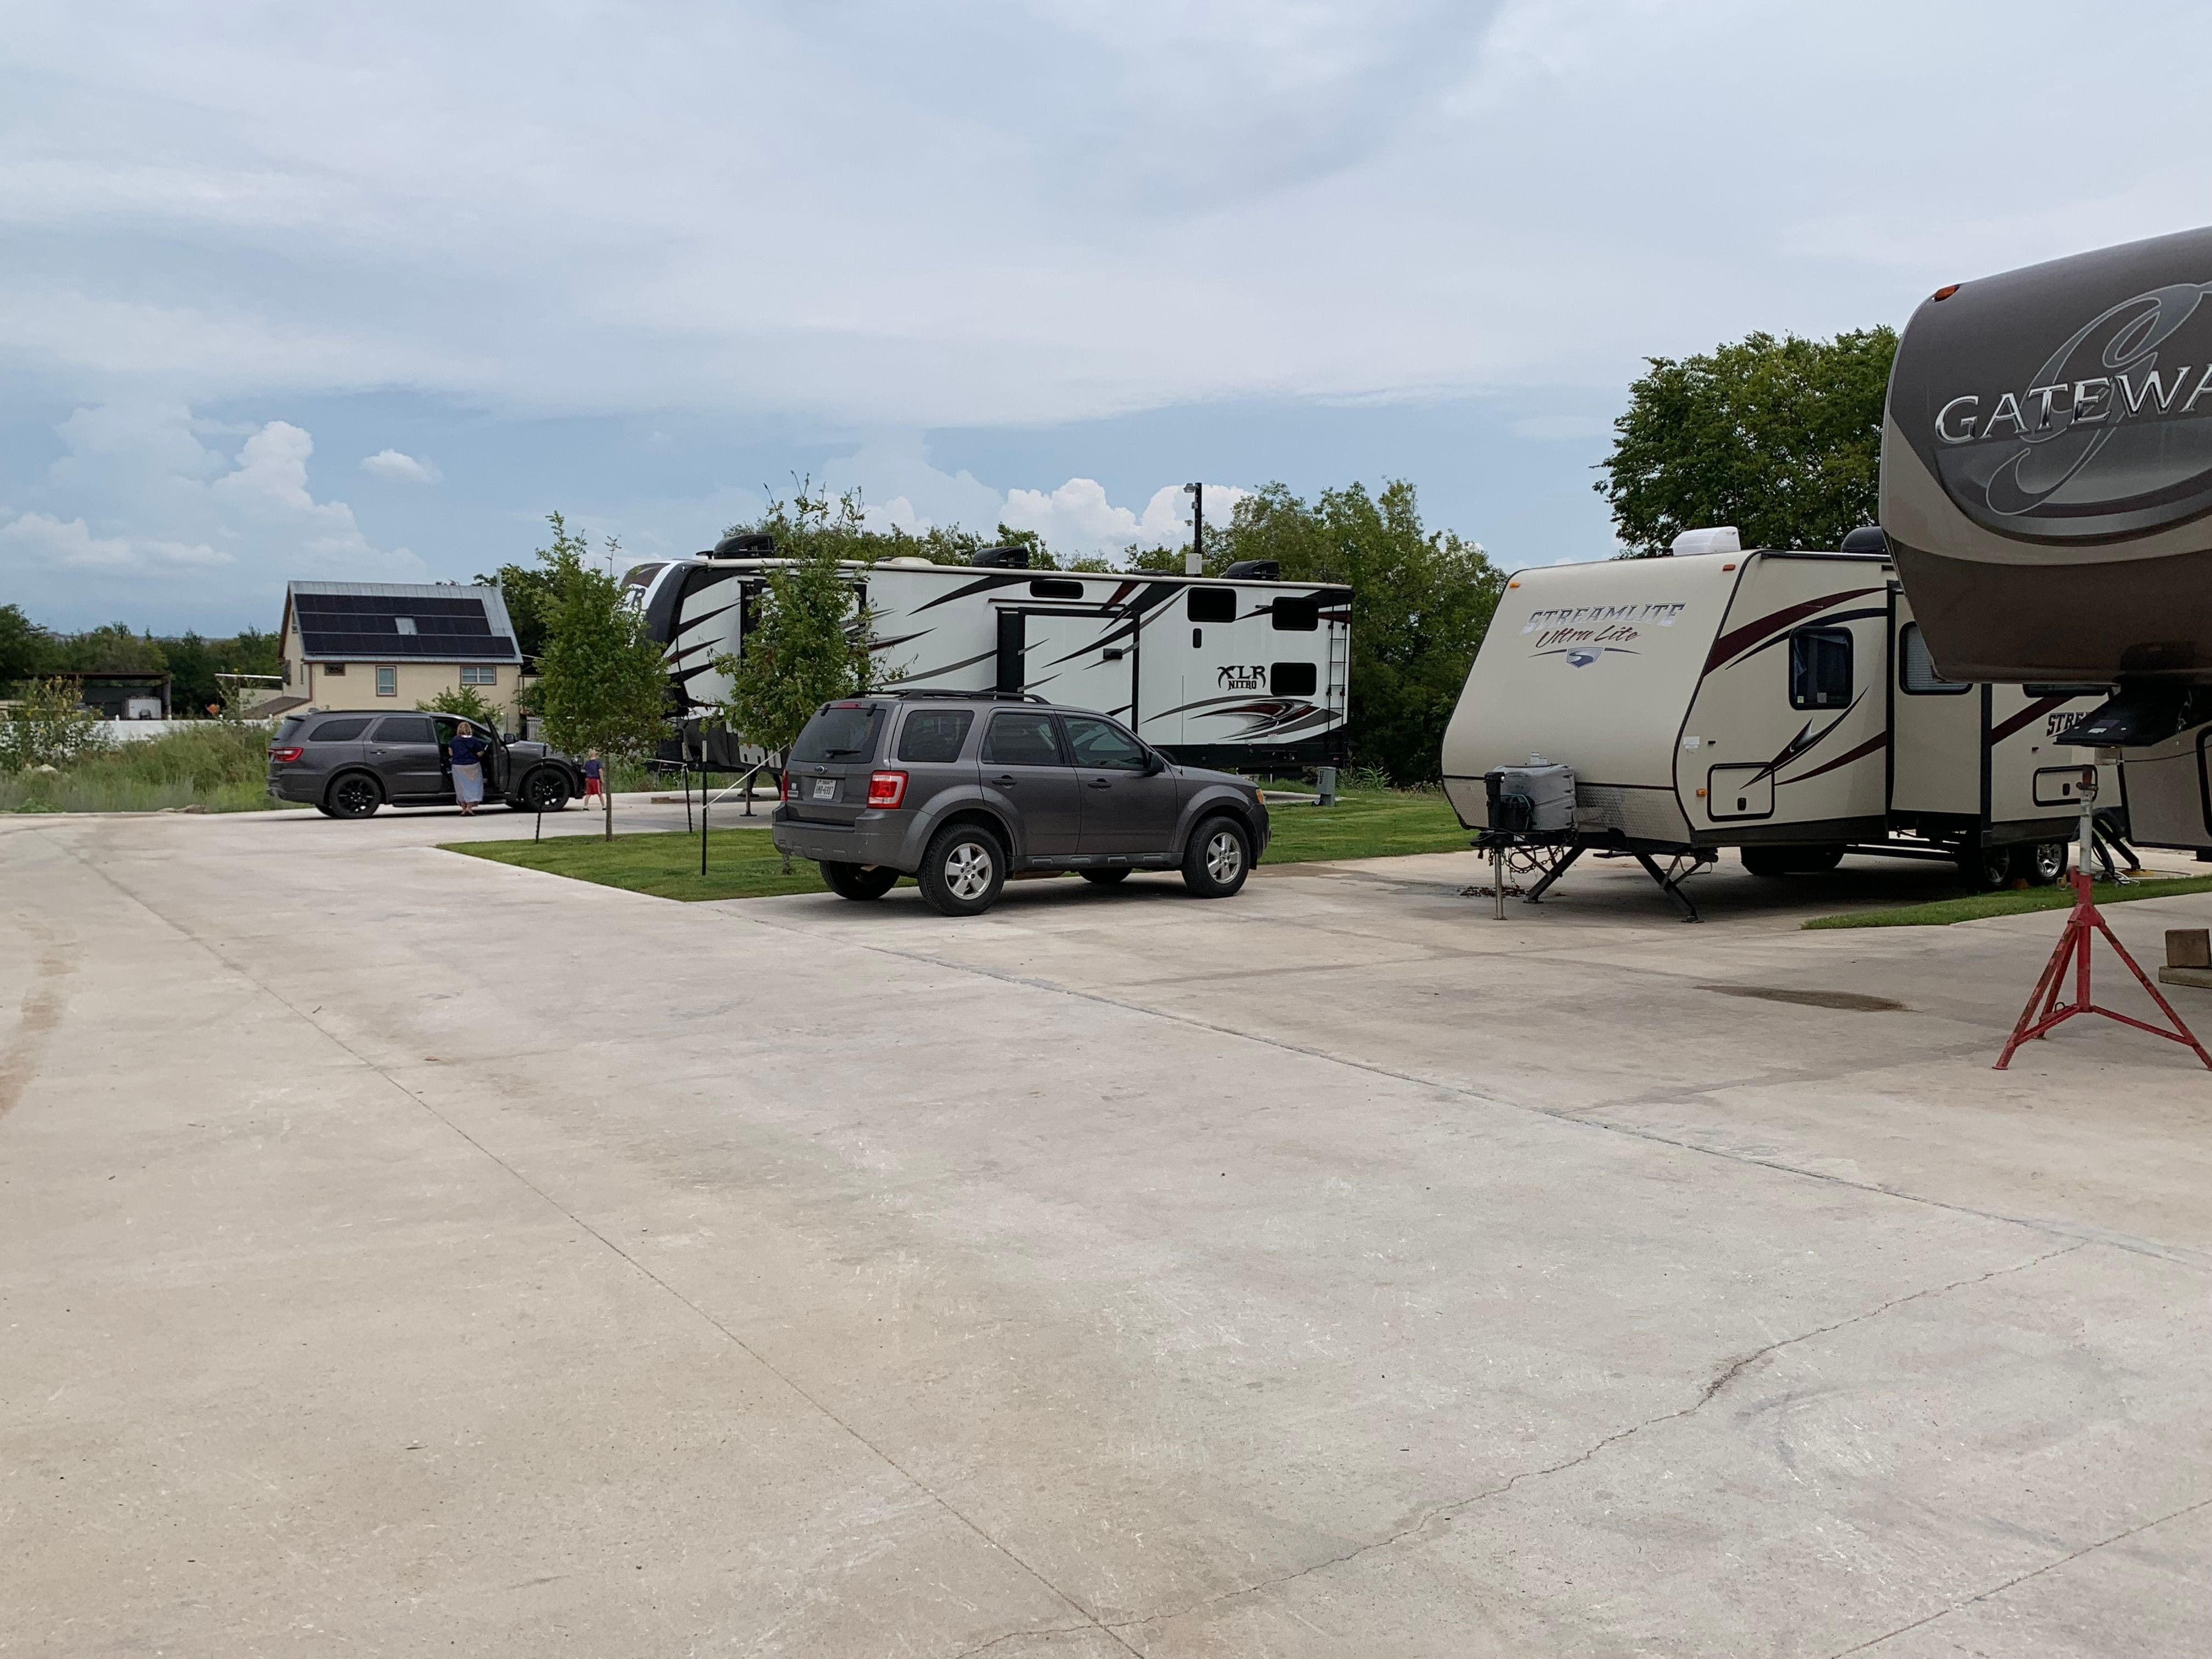 Cars and RVs